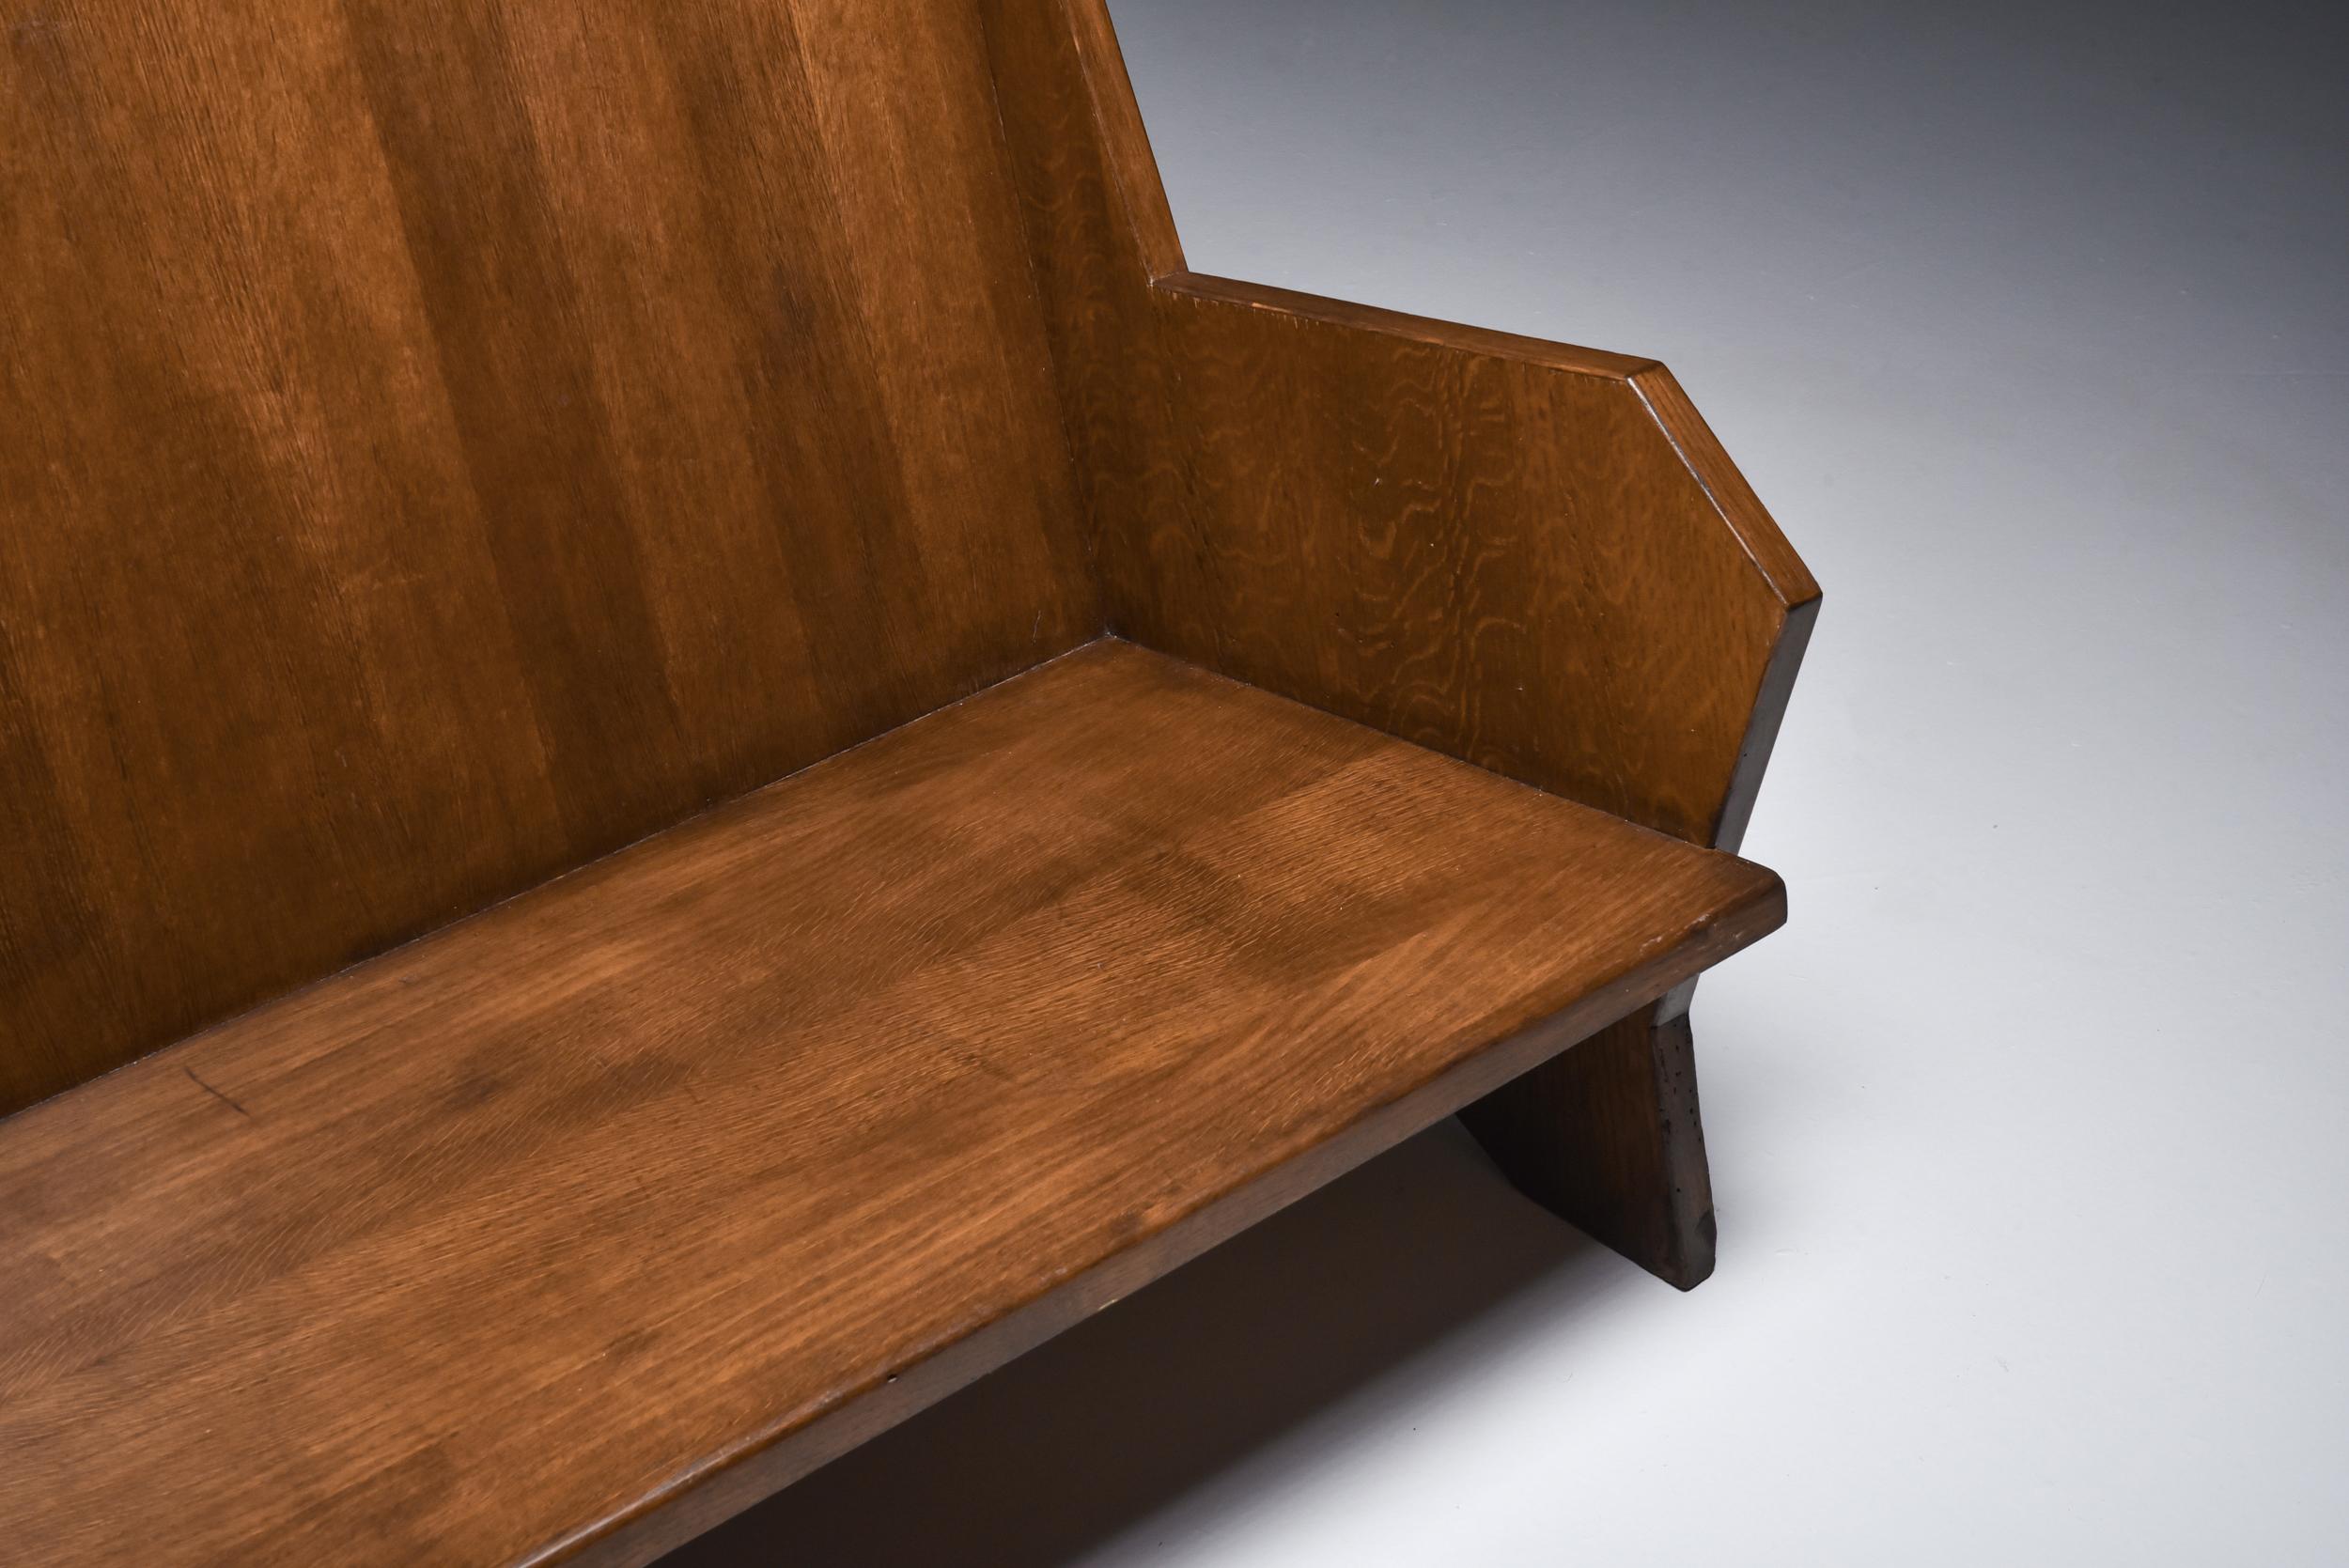 Italian Settee in Stained Beech, 1940s For Sale 1